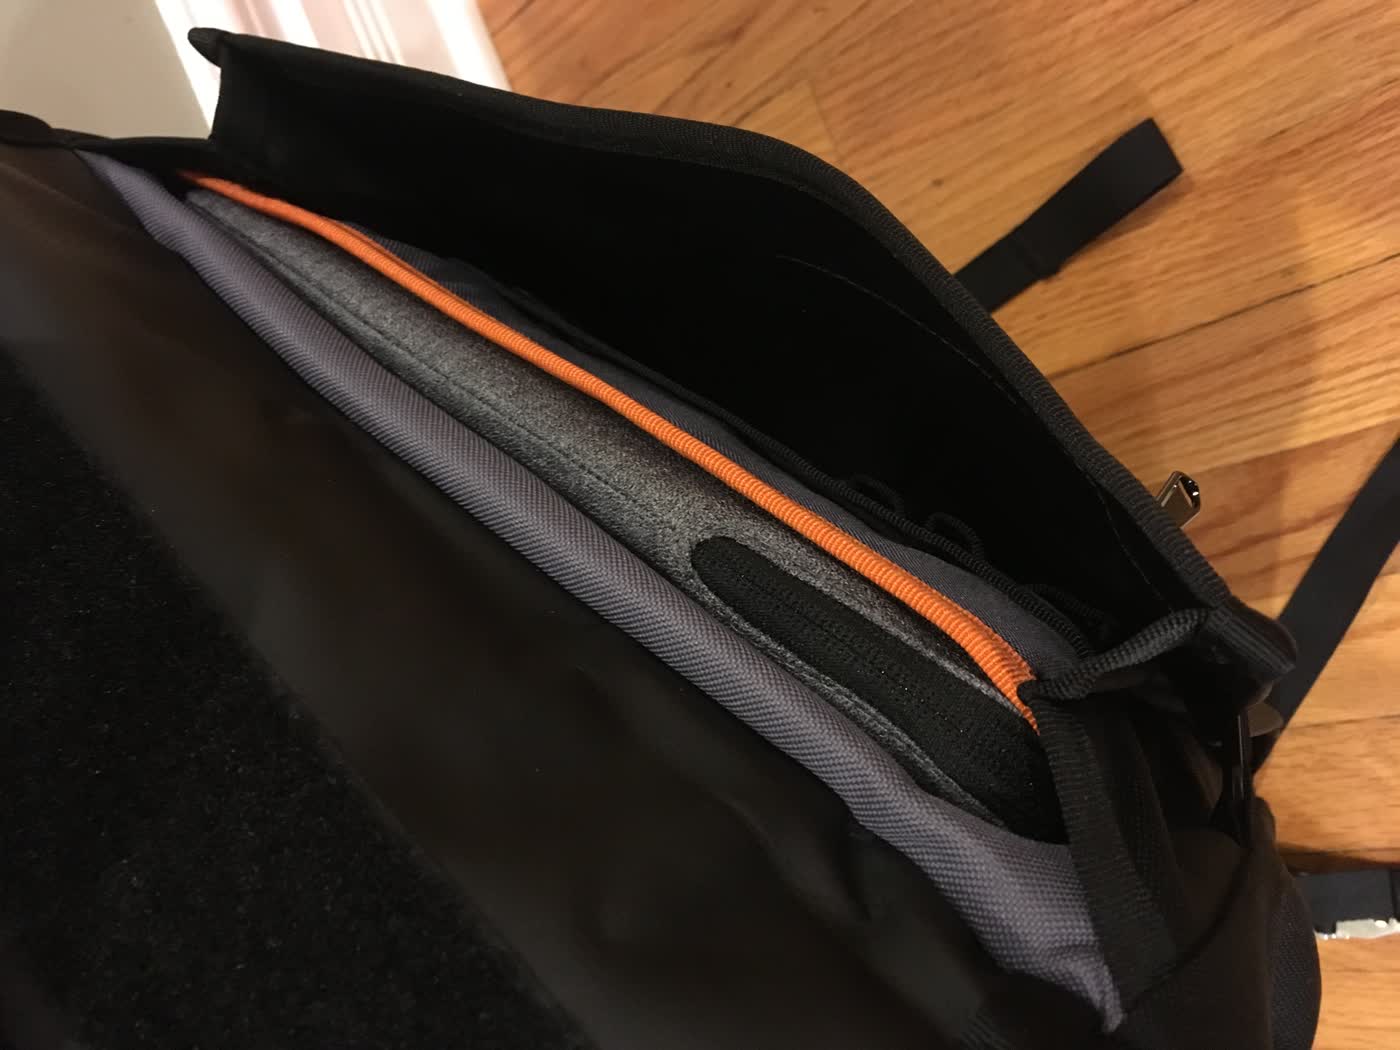 My laptop sleeve fitting in the Chome Bravo 2.0